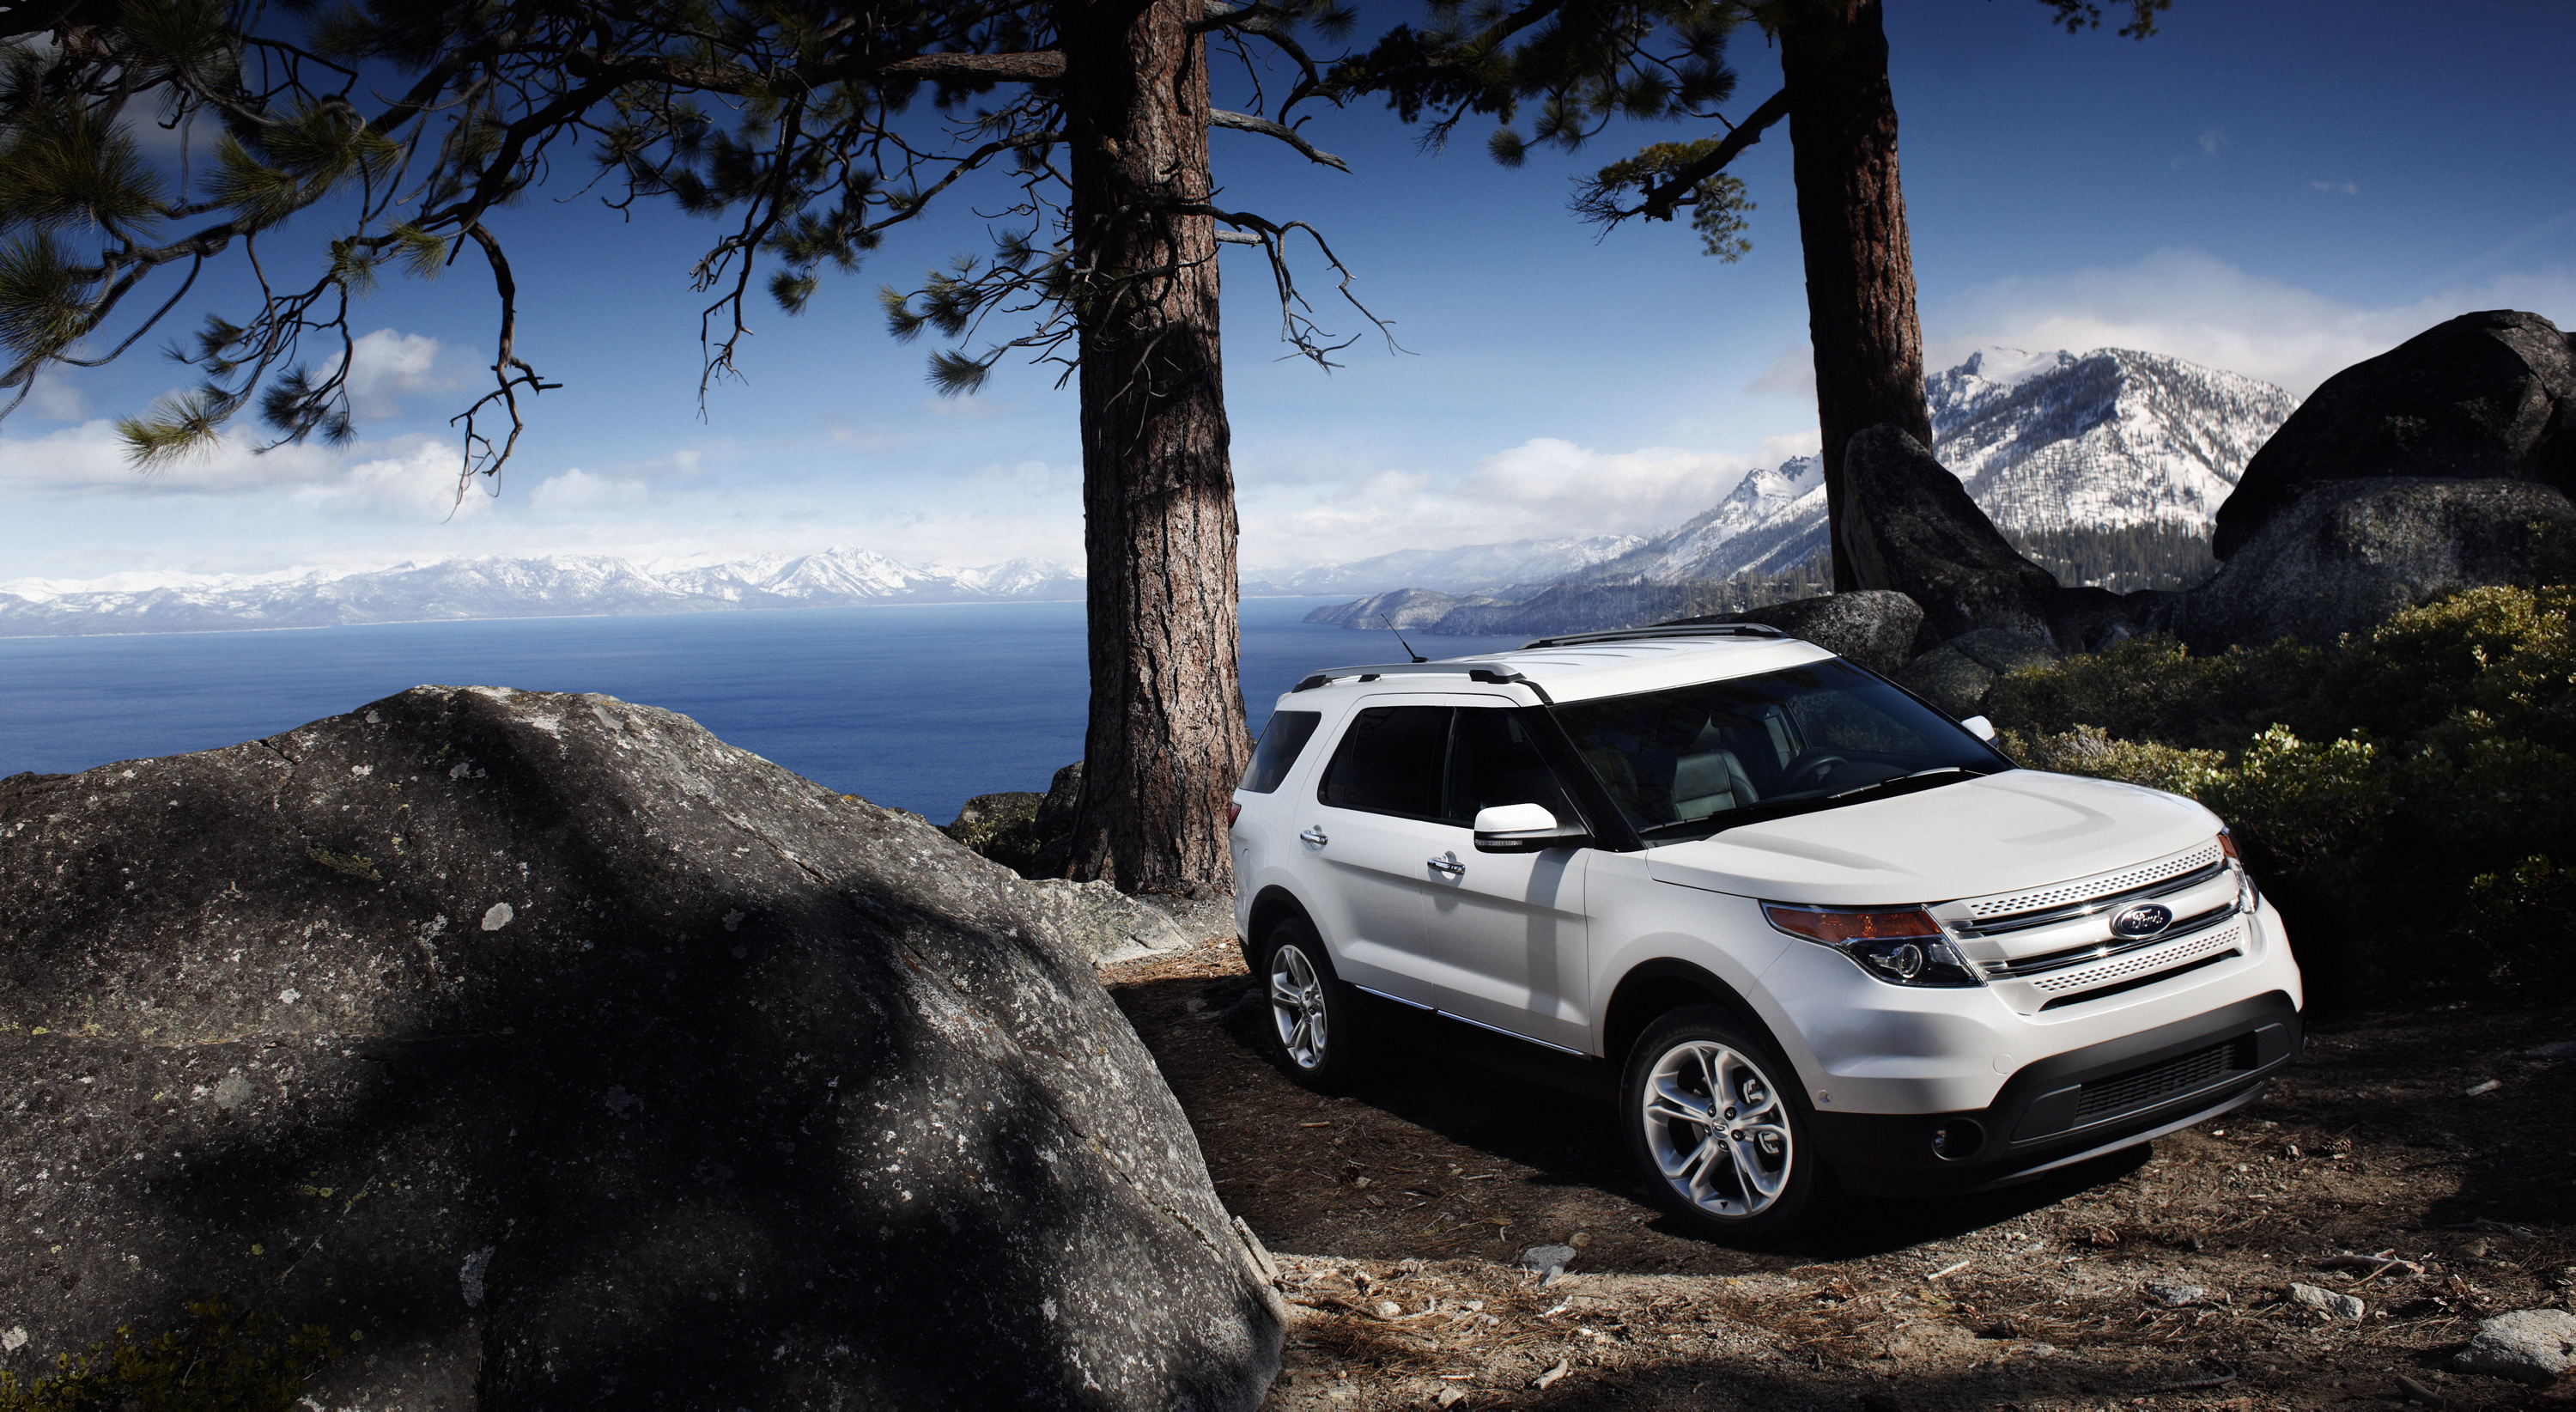 2011 Ford Explorer Dvd - Facts, Functions And Features.Iso